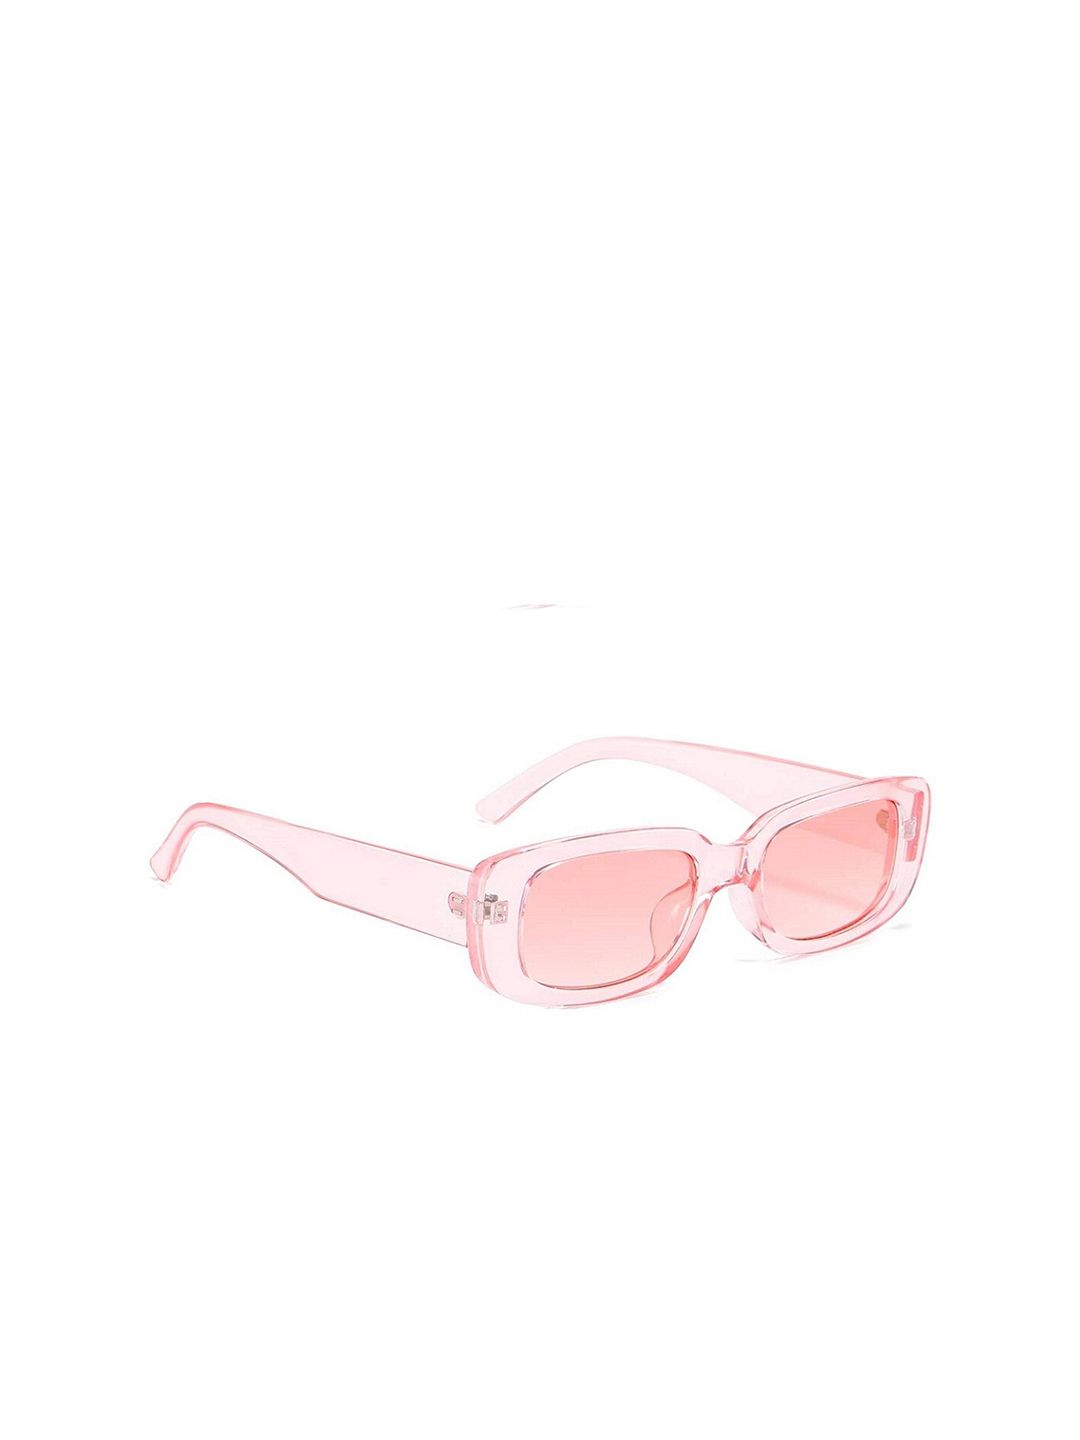 Awestuffs Women Pink Lens & Pink Rectangle Sunglasses with UV Protected Lens RFPSASIM0622 Price in India